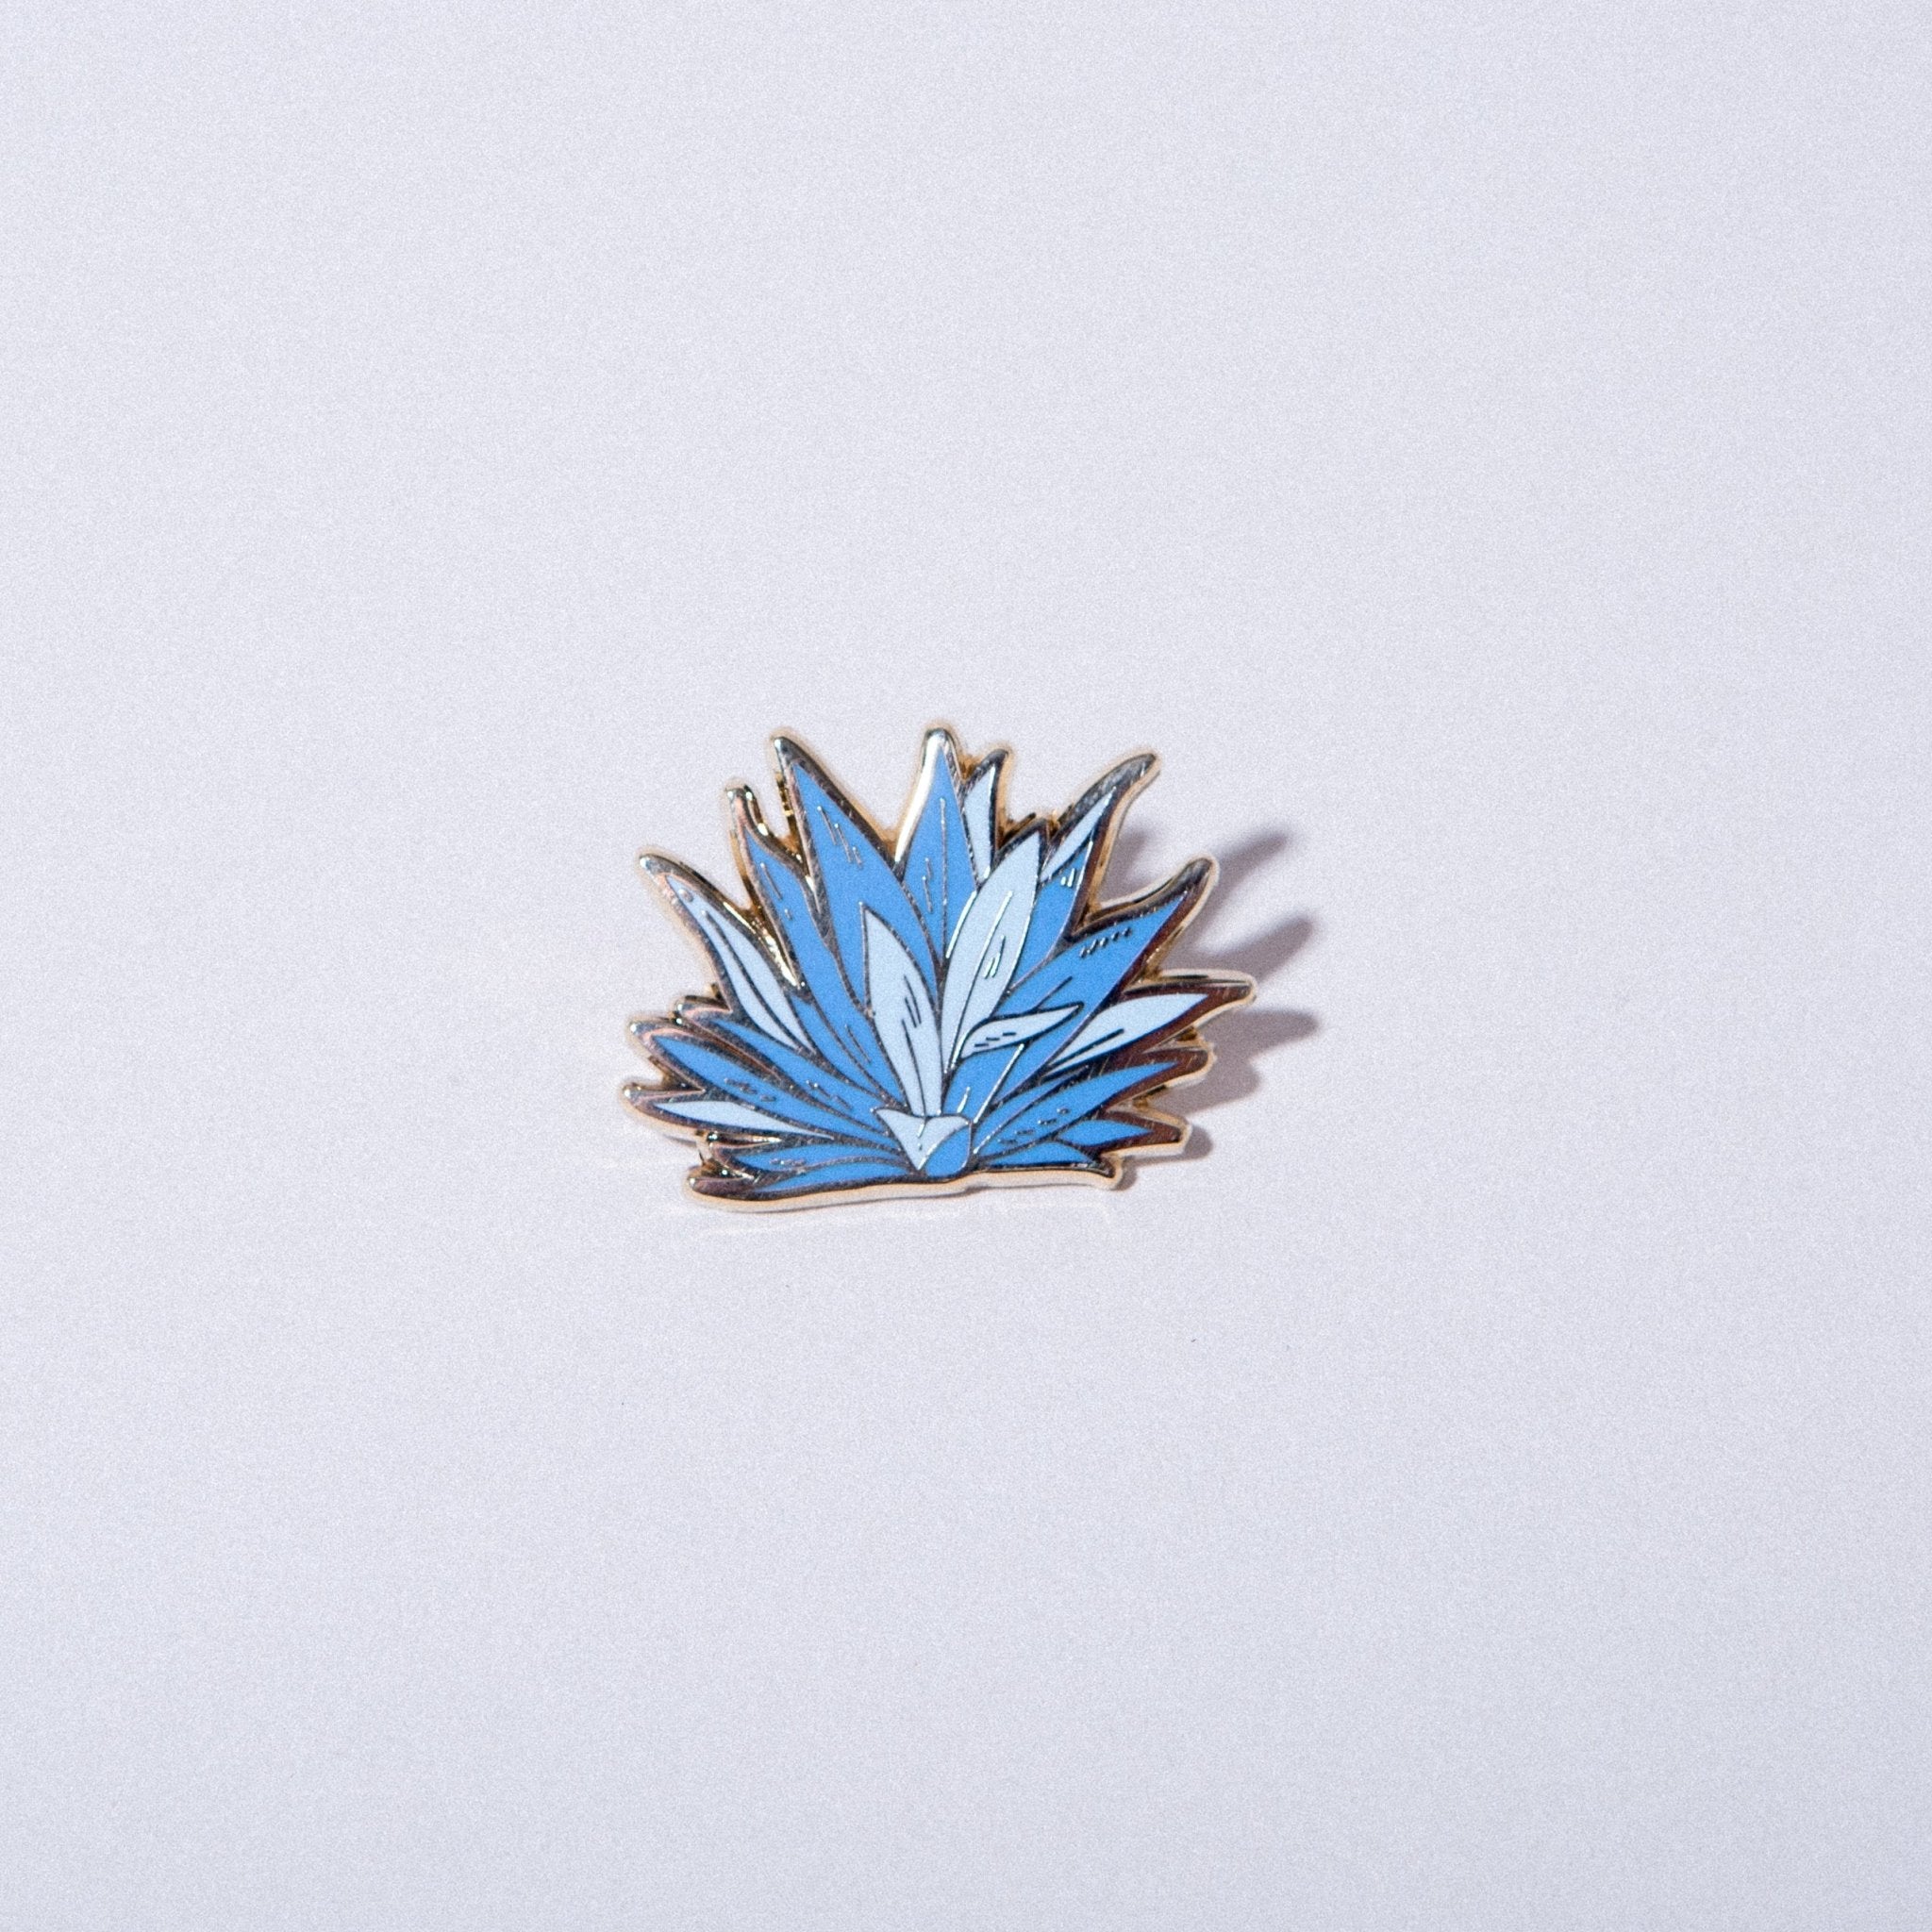 Blue Agave Pin - Case Study